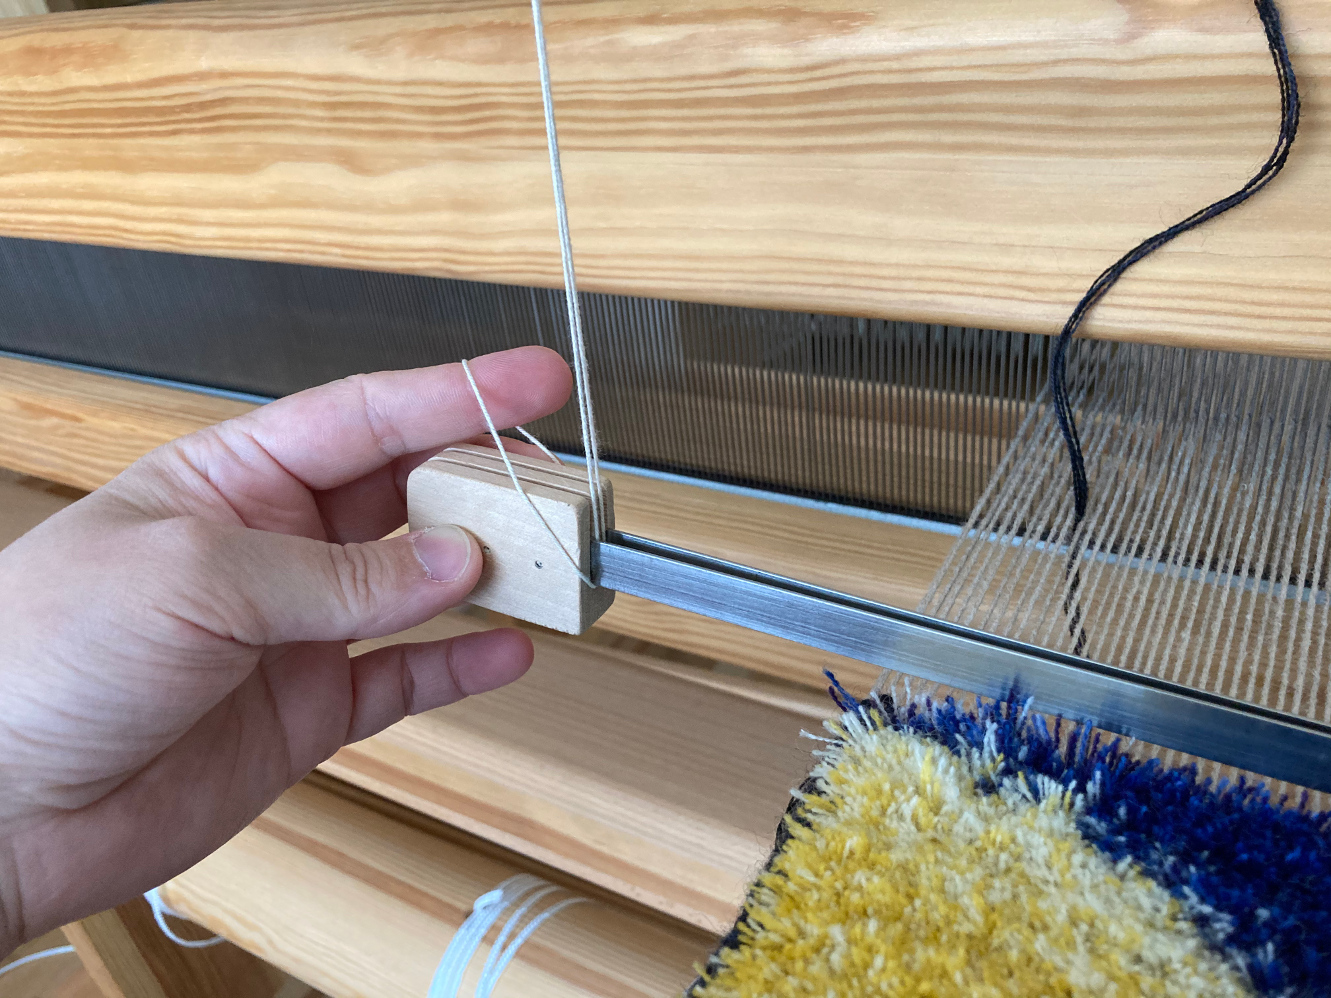 A hand lightly holding a flossa ruler suspended at the front of a loom, above an in-progress carpet weave.